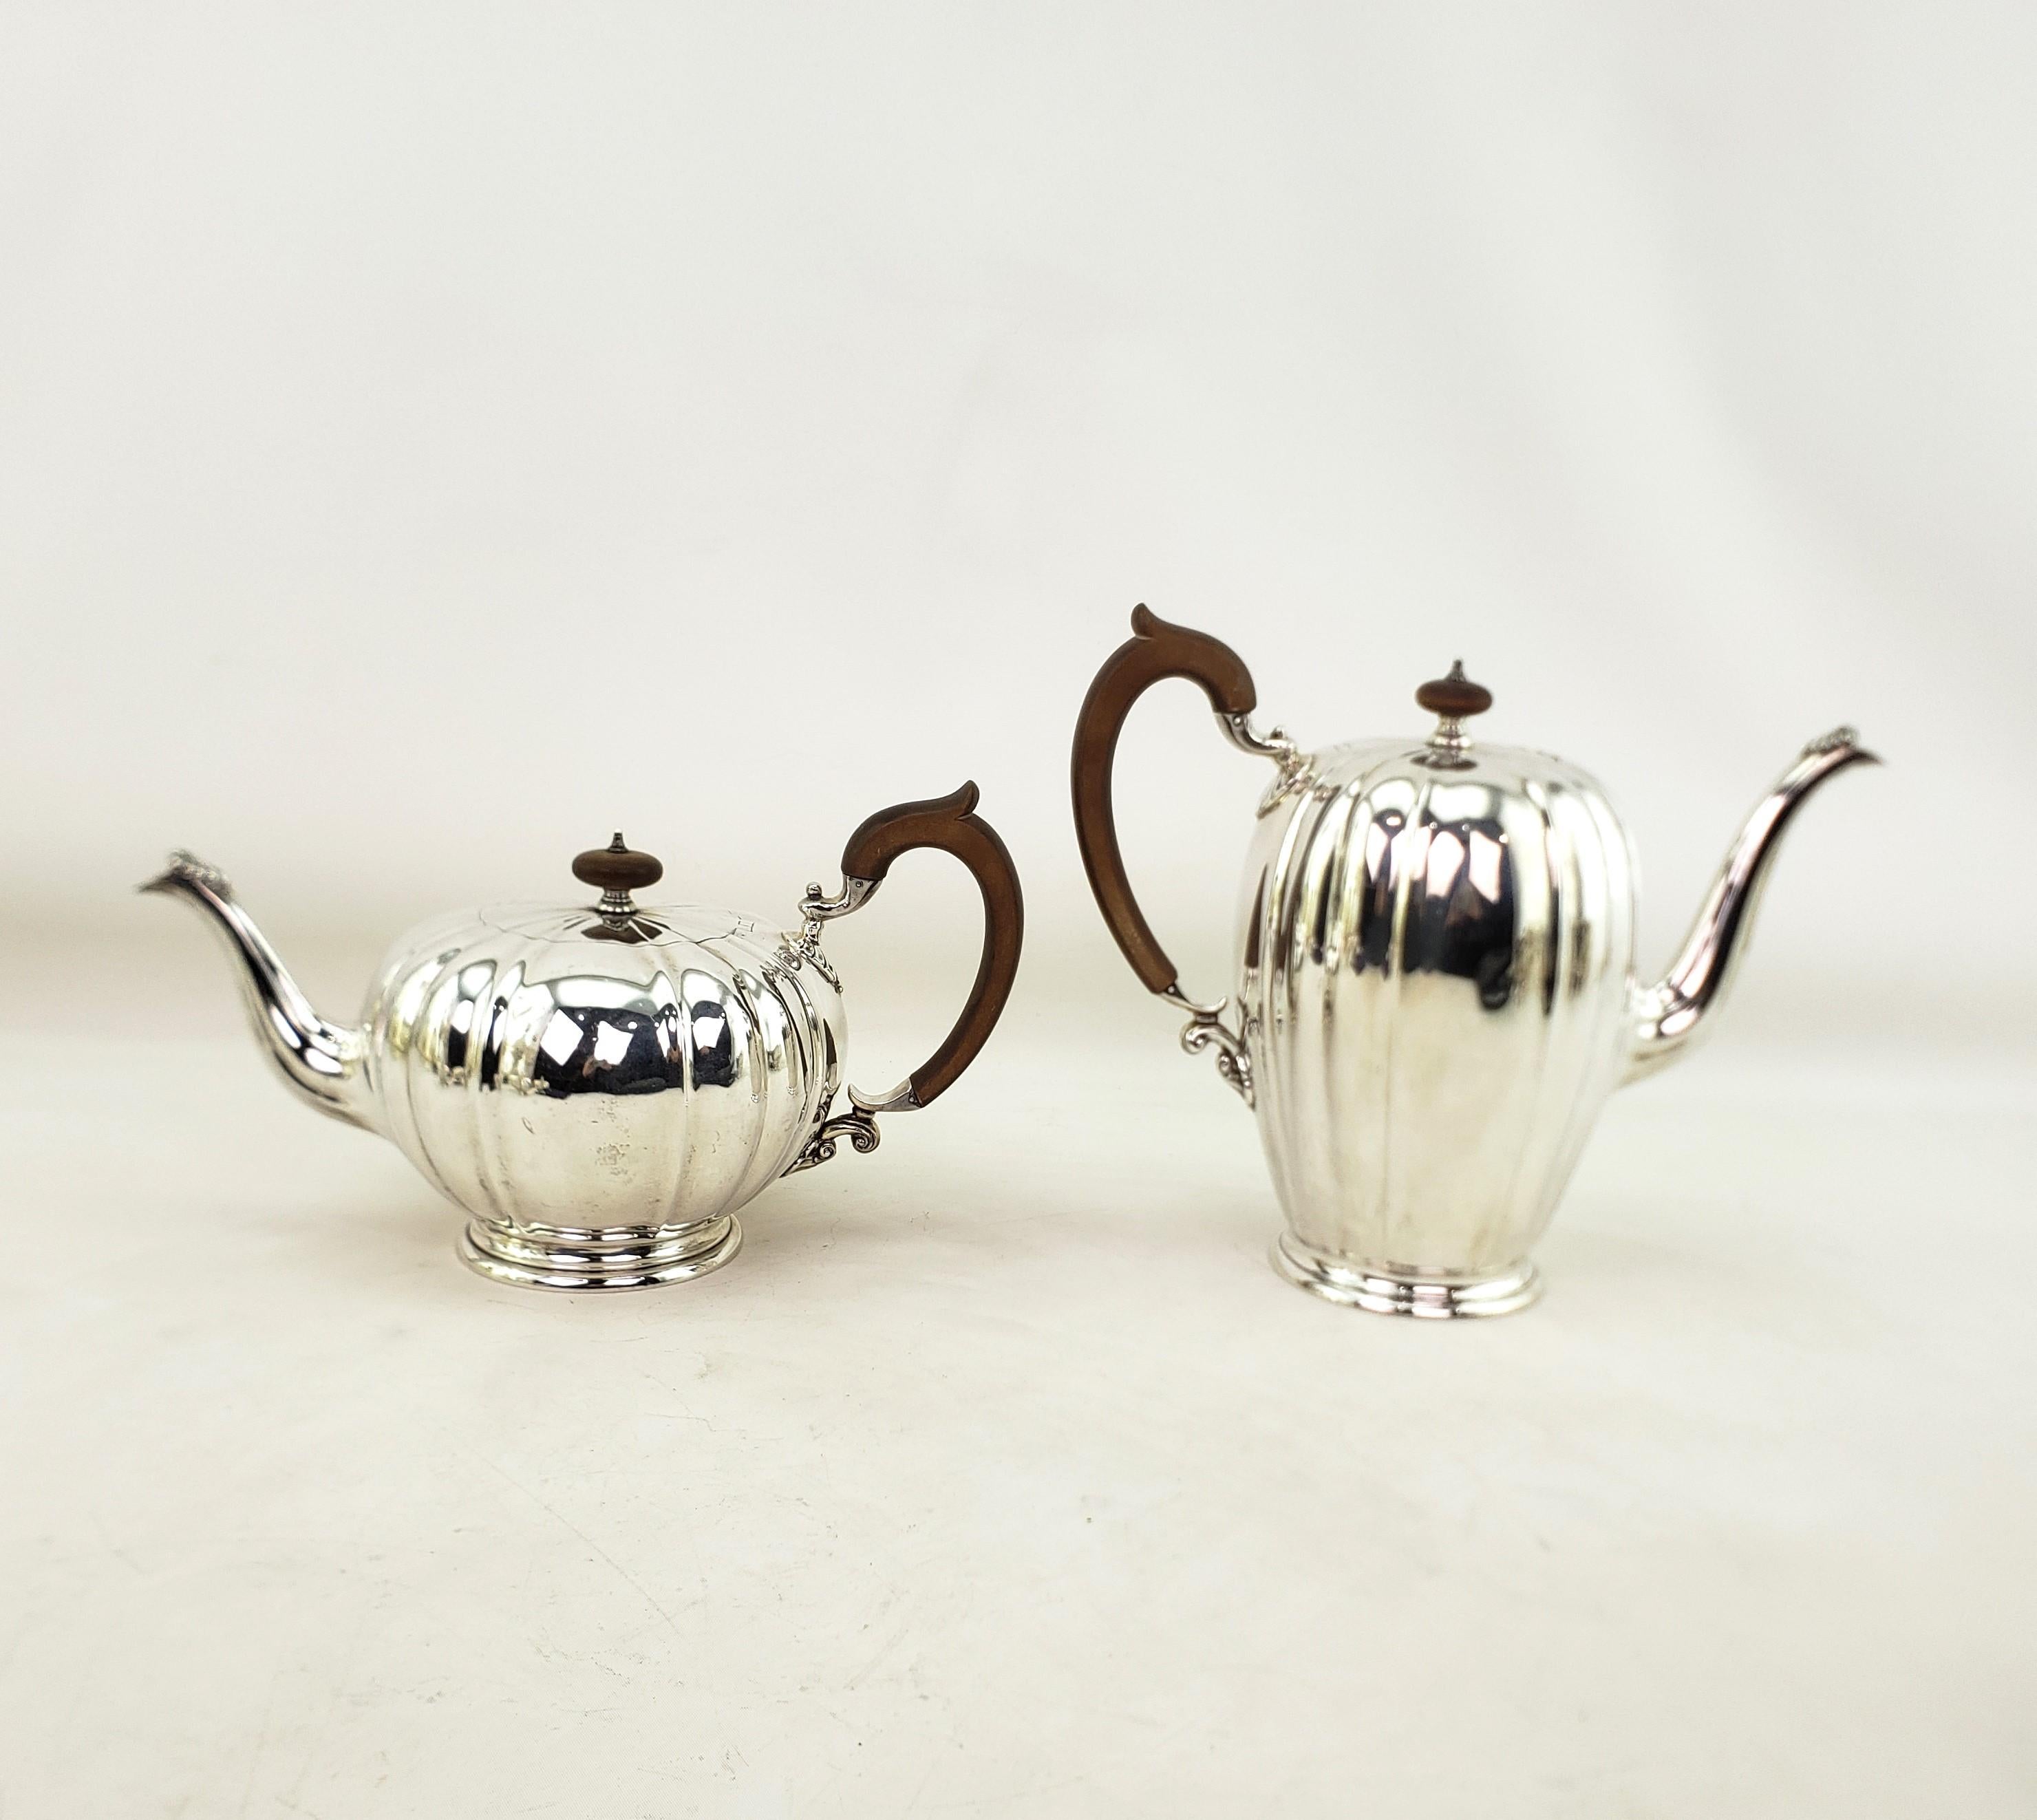 Machine-Made Antique Birks Sterling Silver Tea or Coffee Set with Creamer & Sugar Bowl For Sale